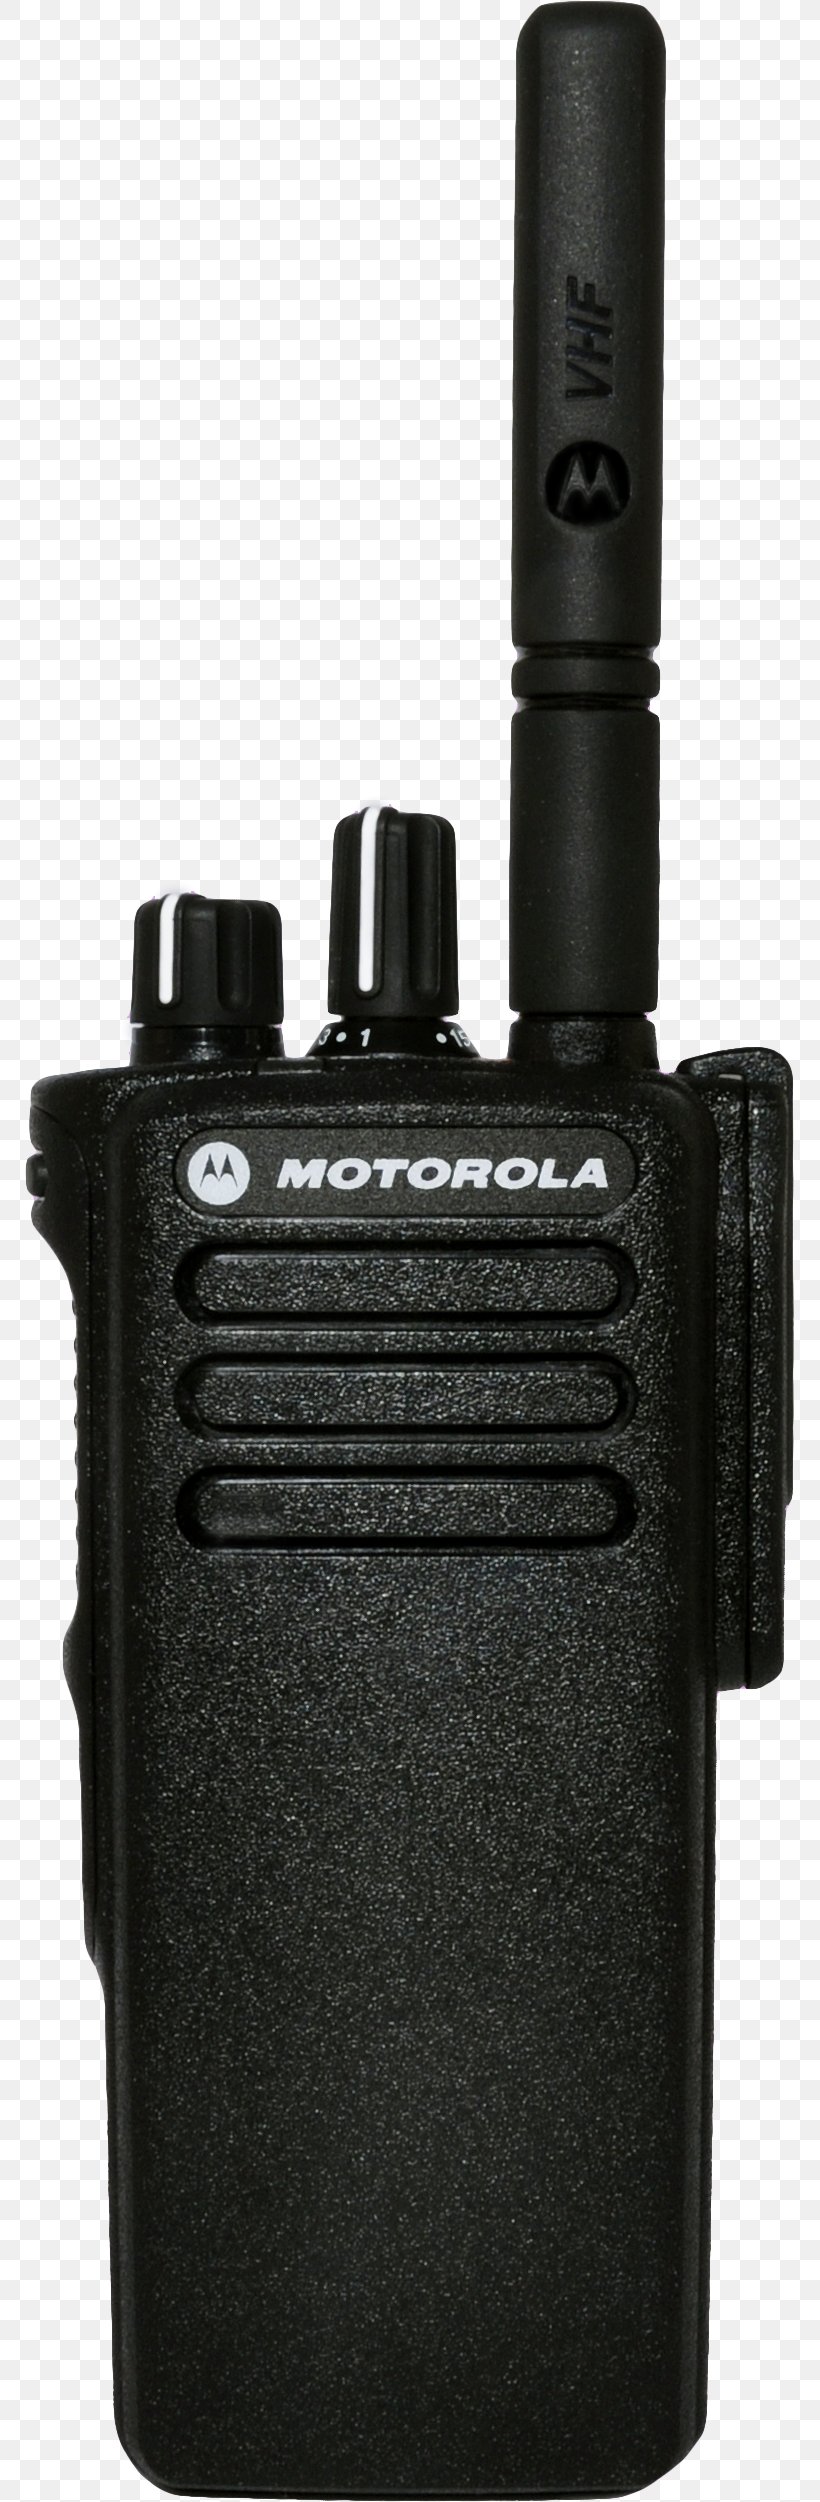 Two-way Radio Ultra High Frequency Very High Frequency Motorola, PNG, 769x2502px, Twoway Radio, Aerials, Electronic Device, Marine Vhf Radio, Mobile Phones Download Free